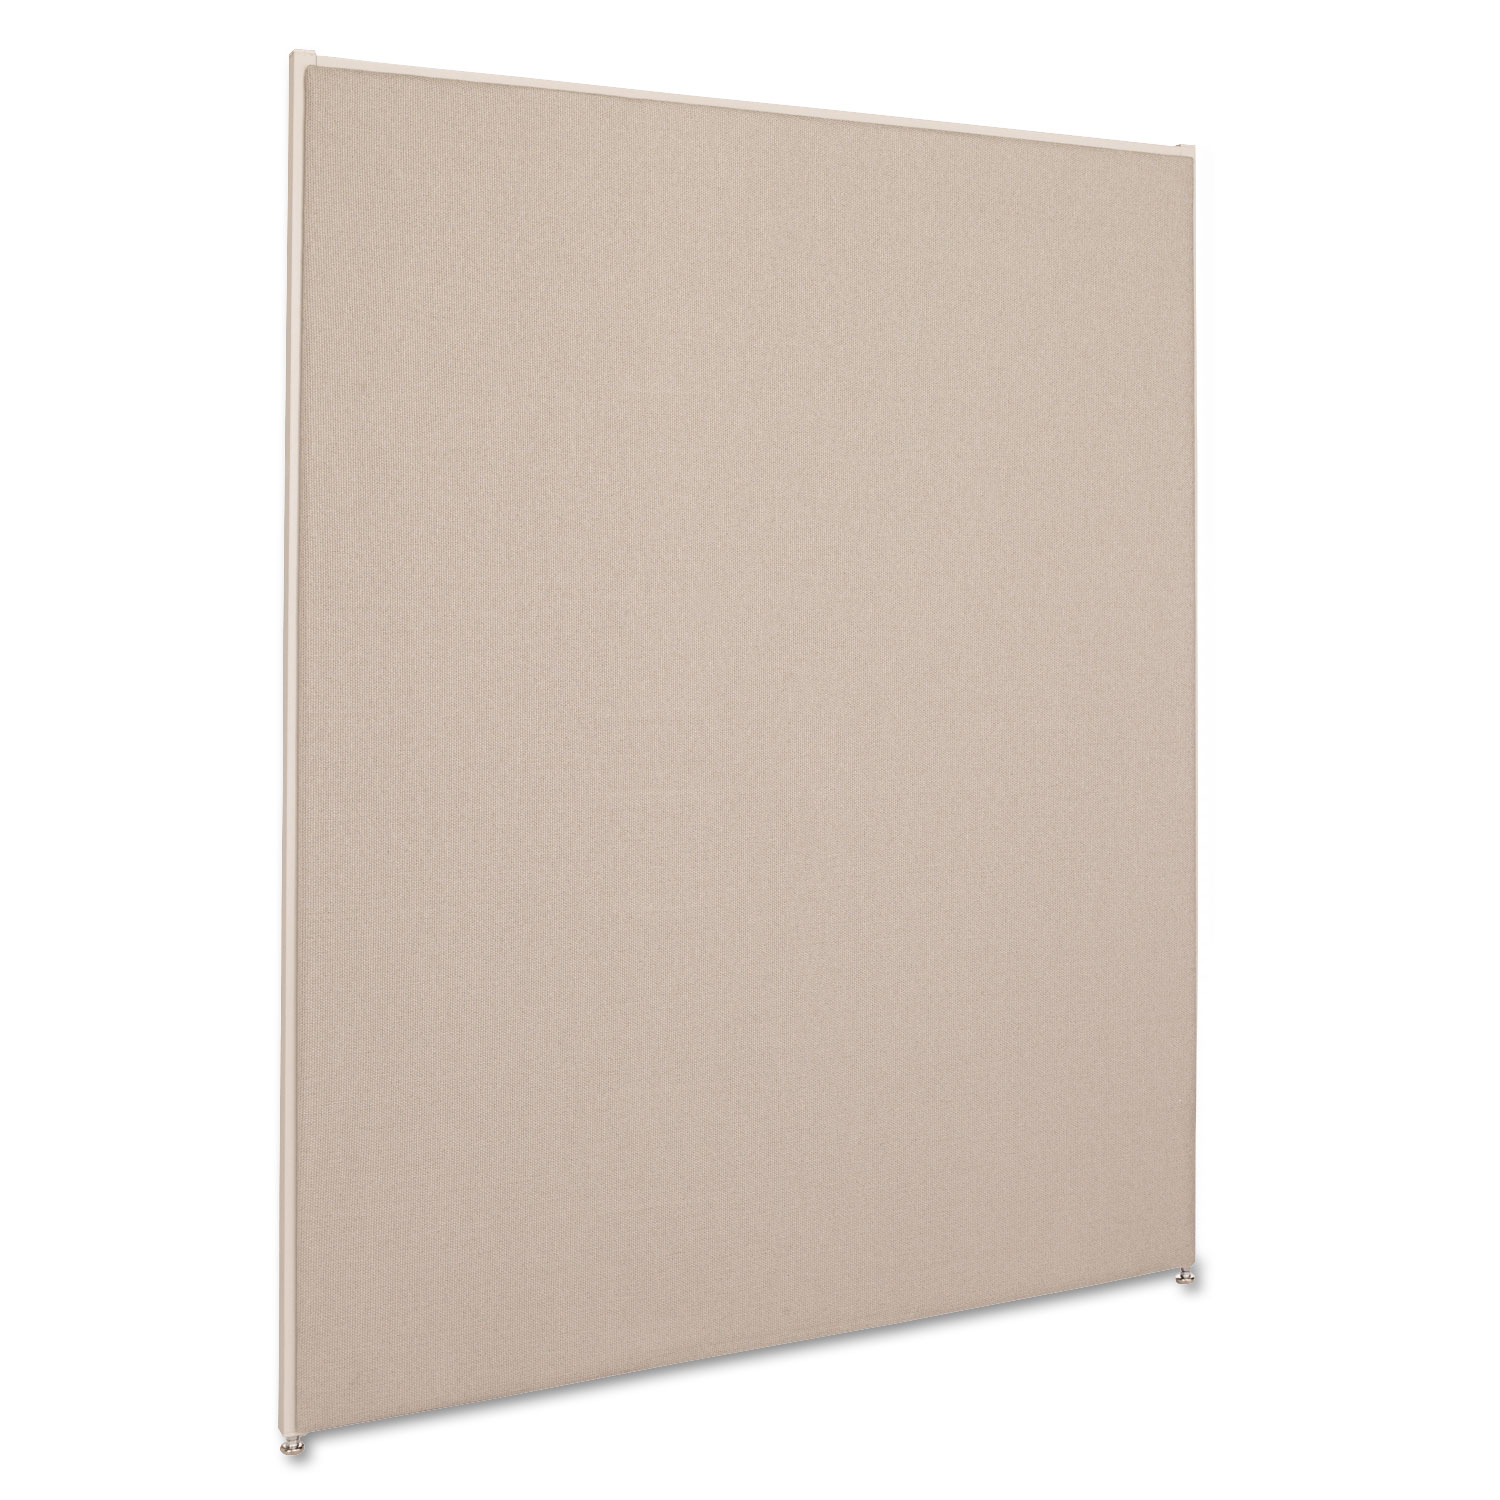 Basyx BSXP6048GYGY Vers&#233; Office Panel, 48w x 60h, Gray